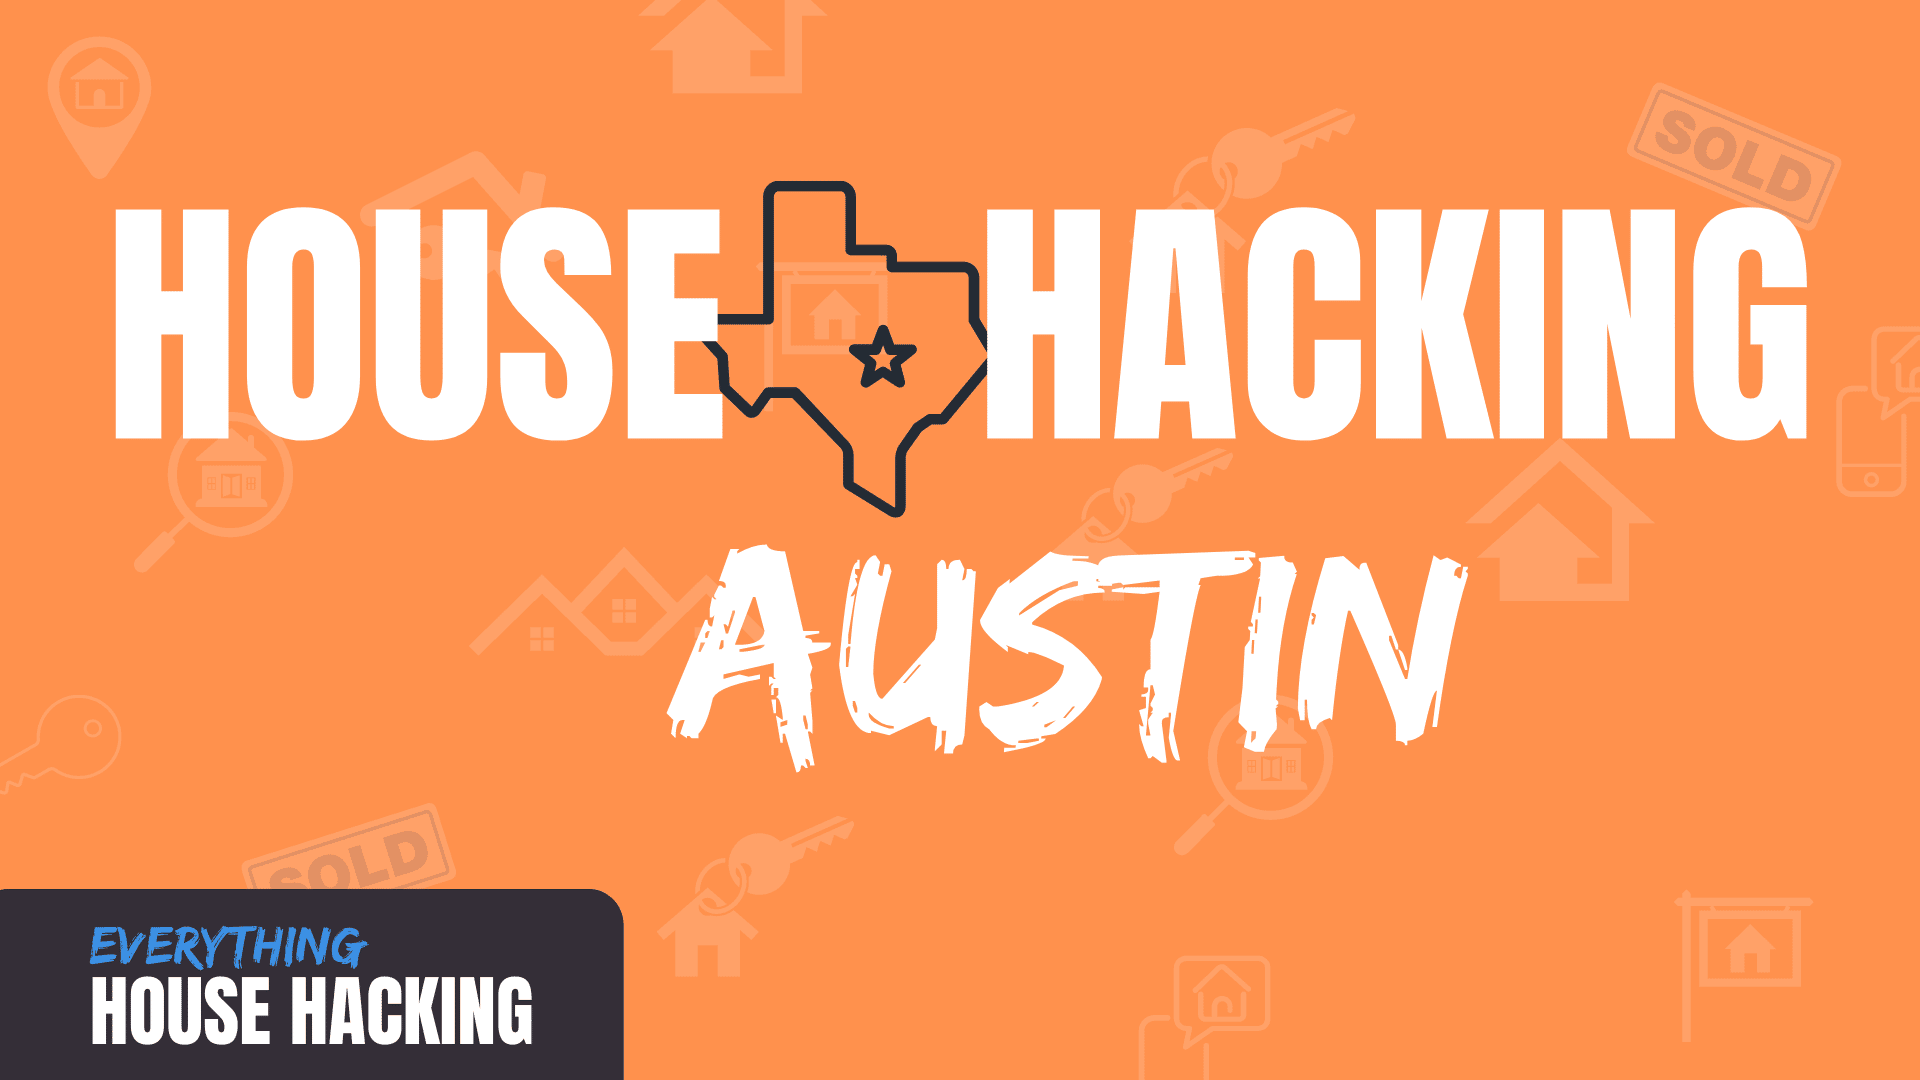 house hacking Austin in white text with clipart image of Texas with star on Austin and orange background